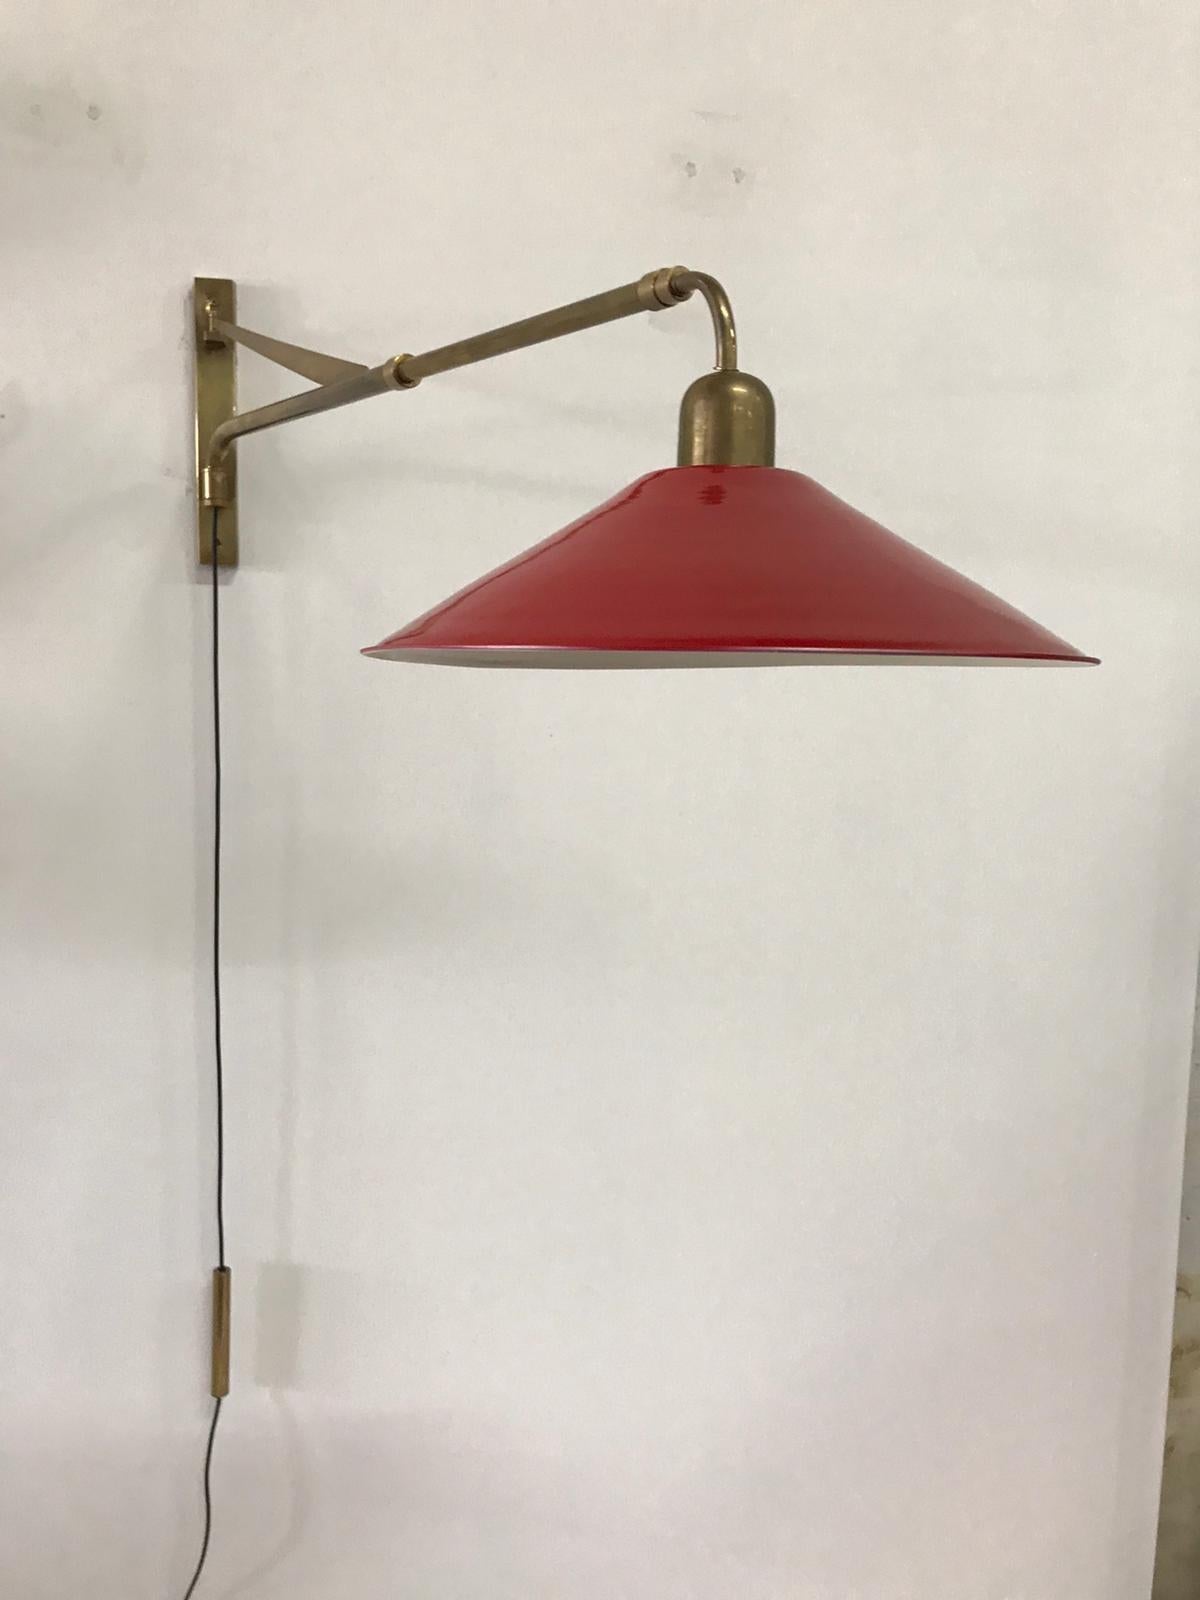 Sleek and rare Stilnovo Style wall lamp in very good original condition. A brass counter-weight with telescopic (adjustable) arm that swivels 180 degrees. Can be mounted at any height. Italian 1950s- Full extension length is 63 inches (see detail